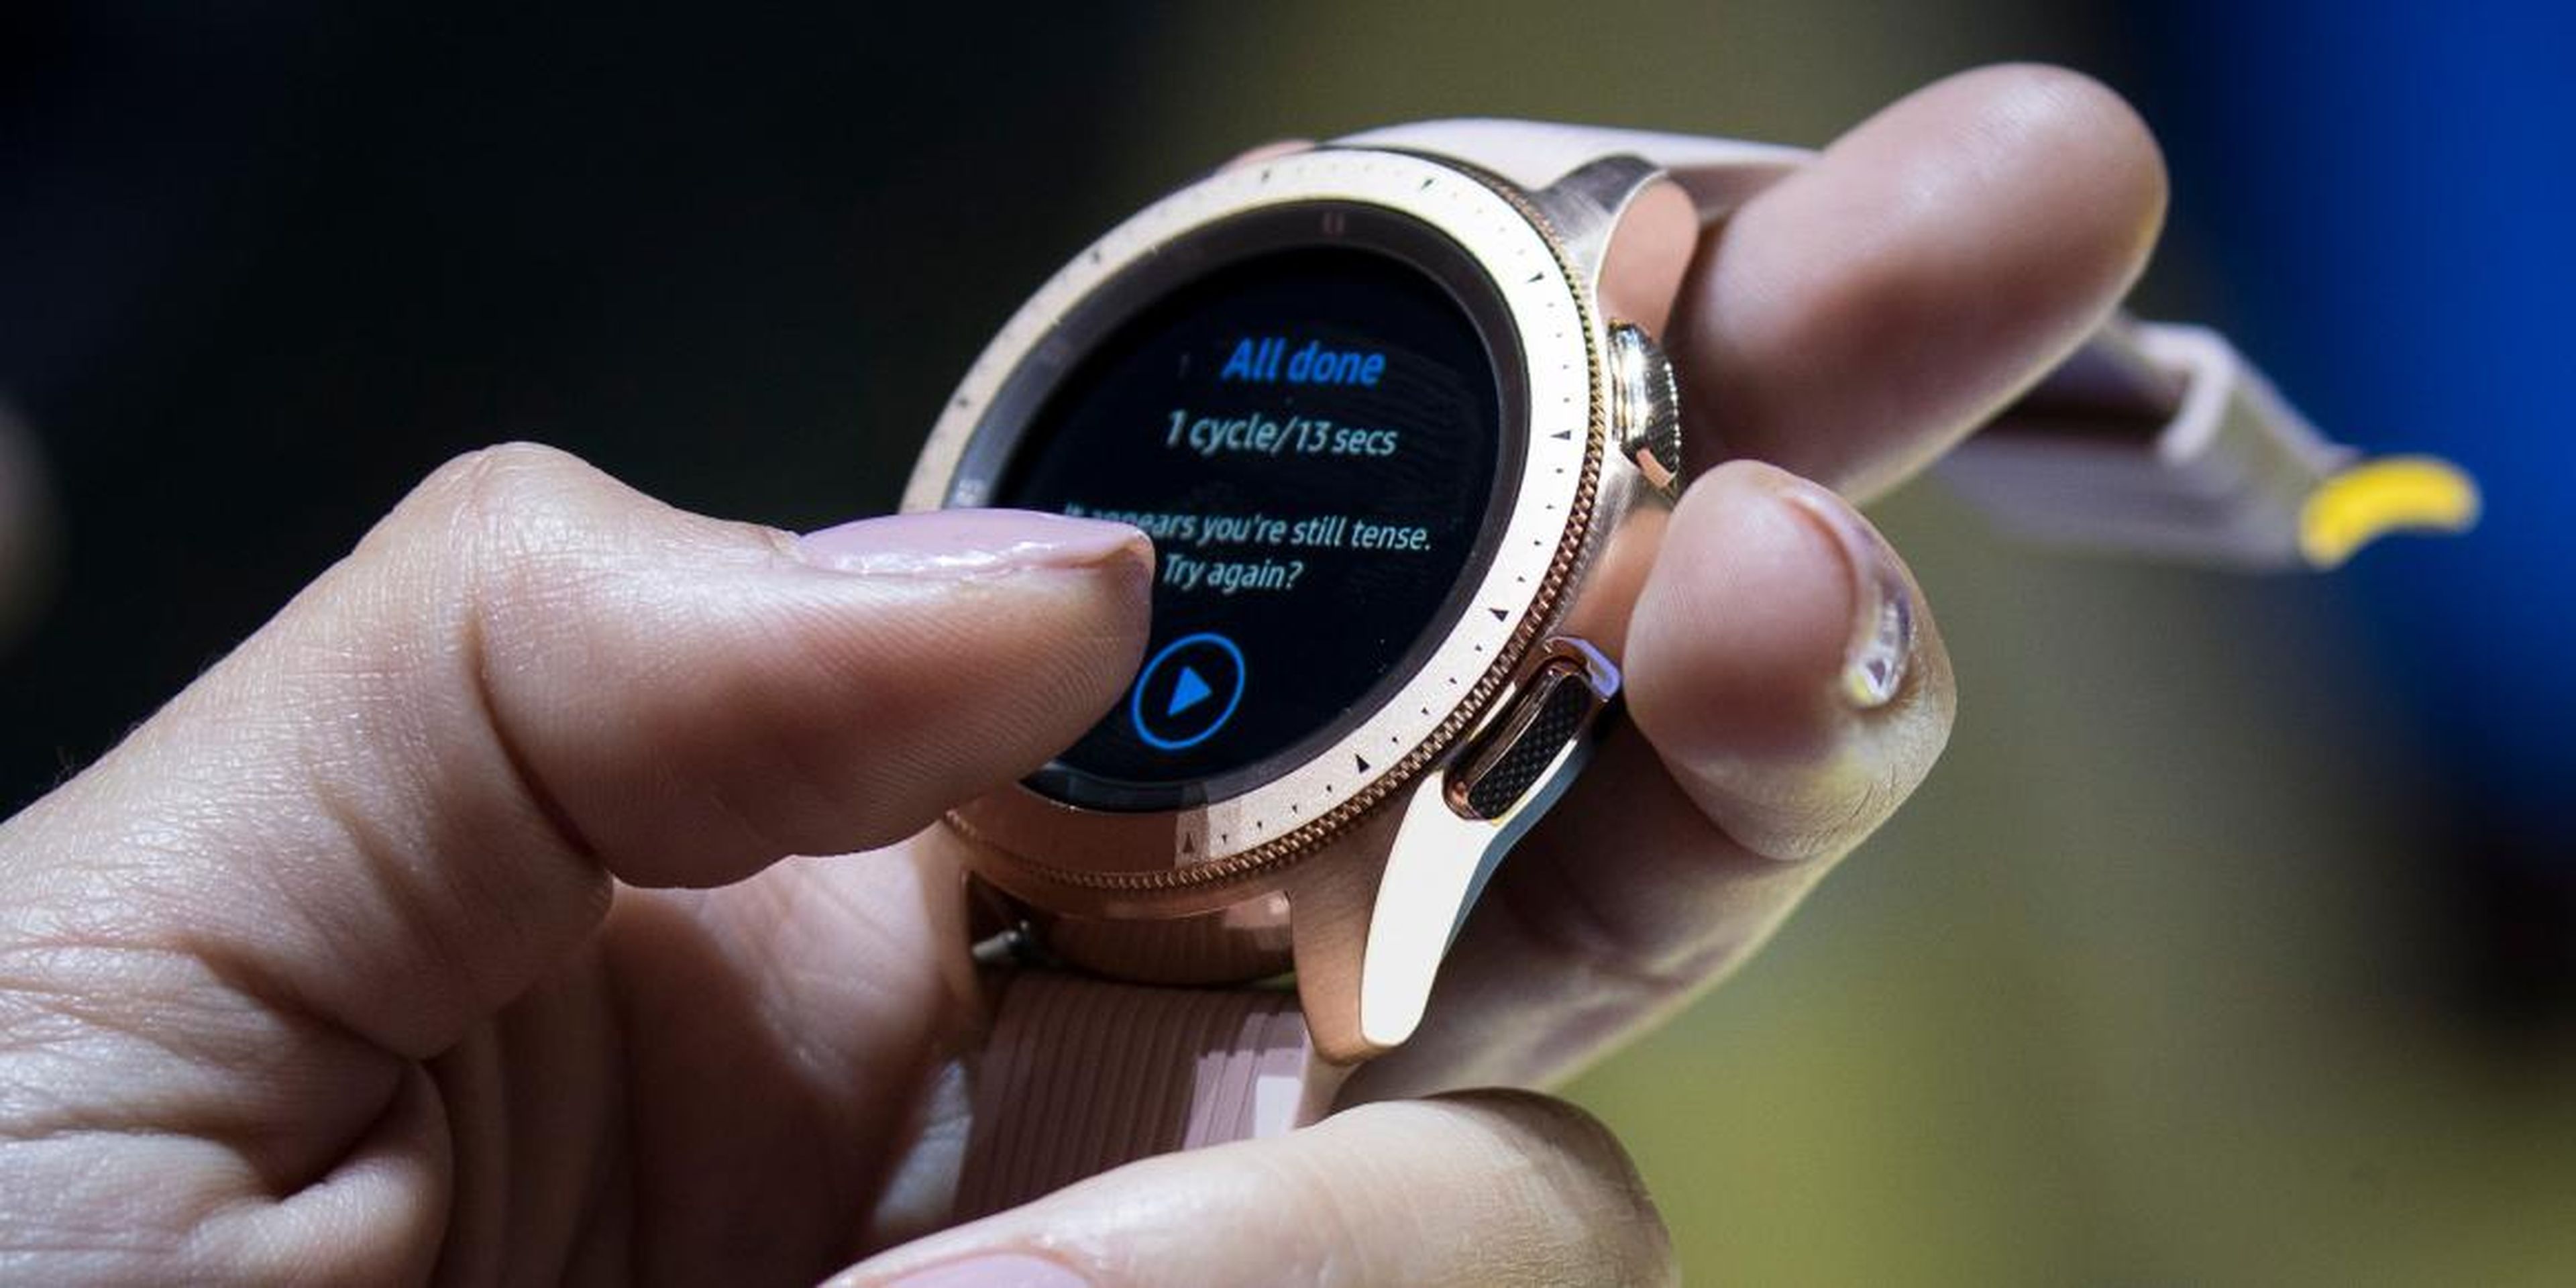 Here's how Samsung's new $330 Galaxy Watch compares to the Apple Watch